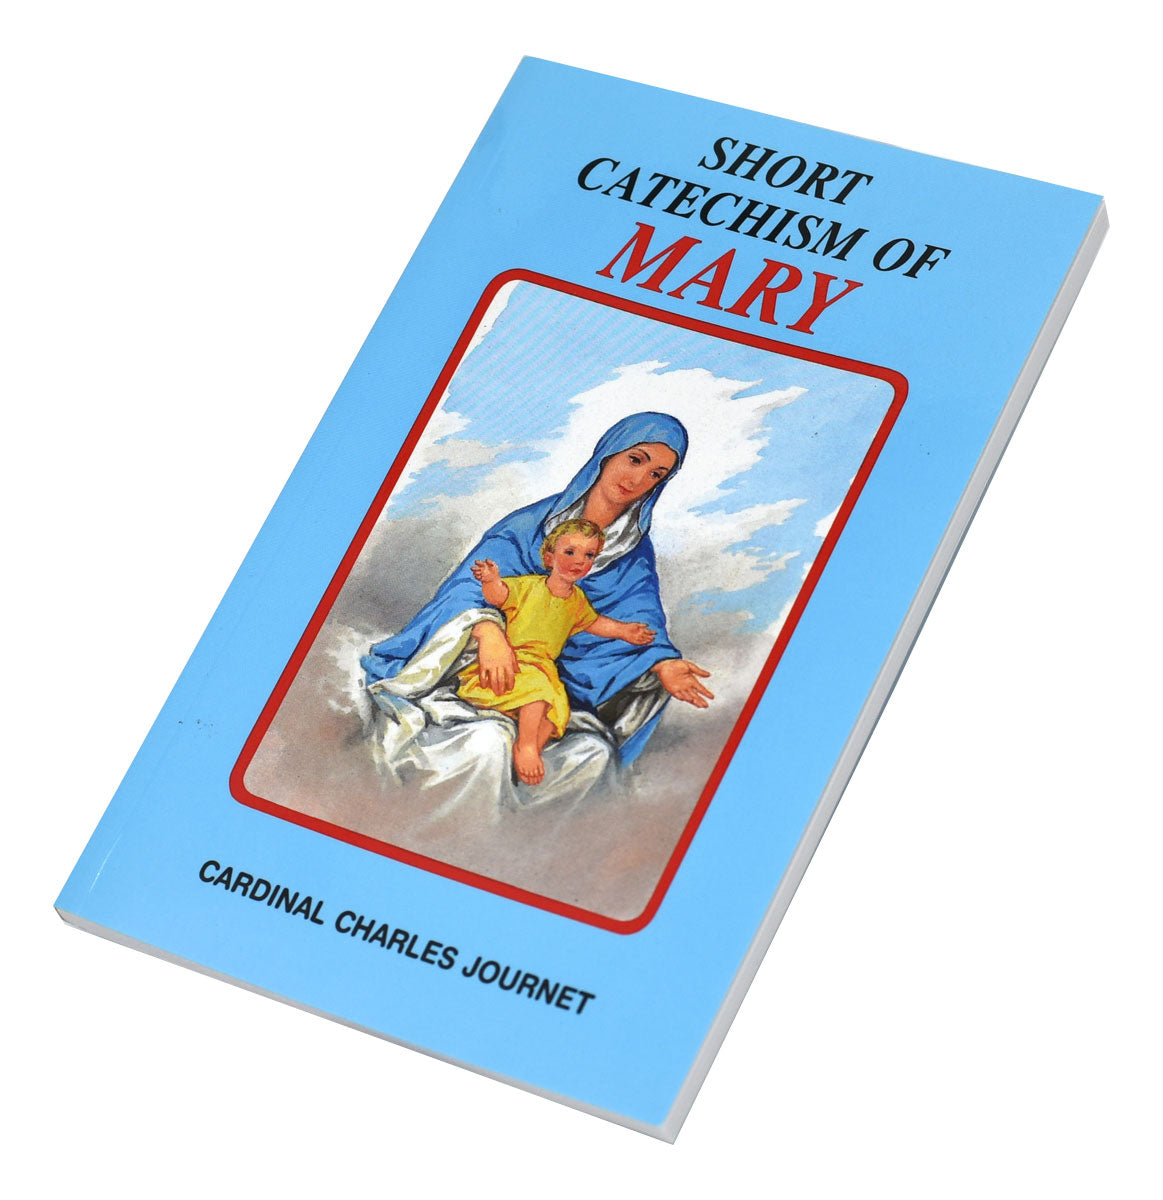 Short Catechism Of Mary